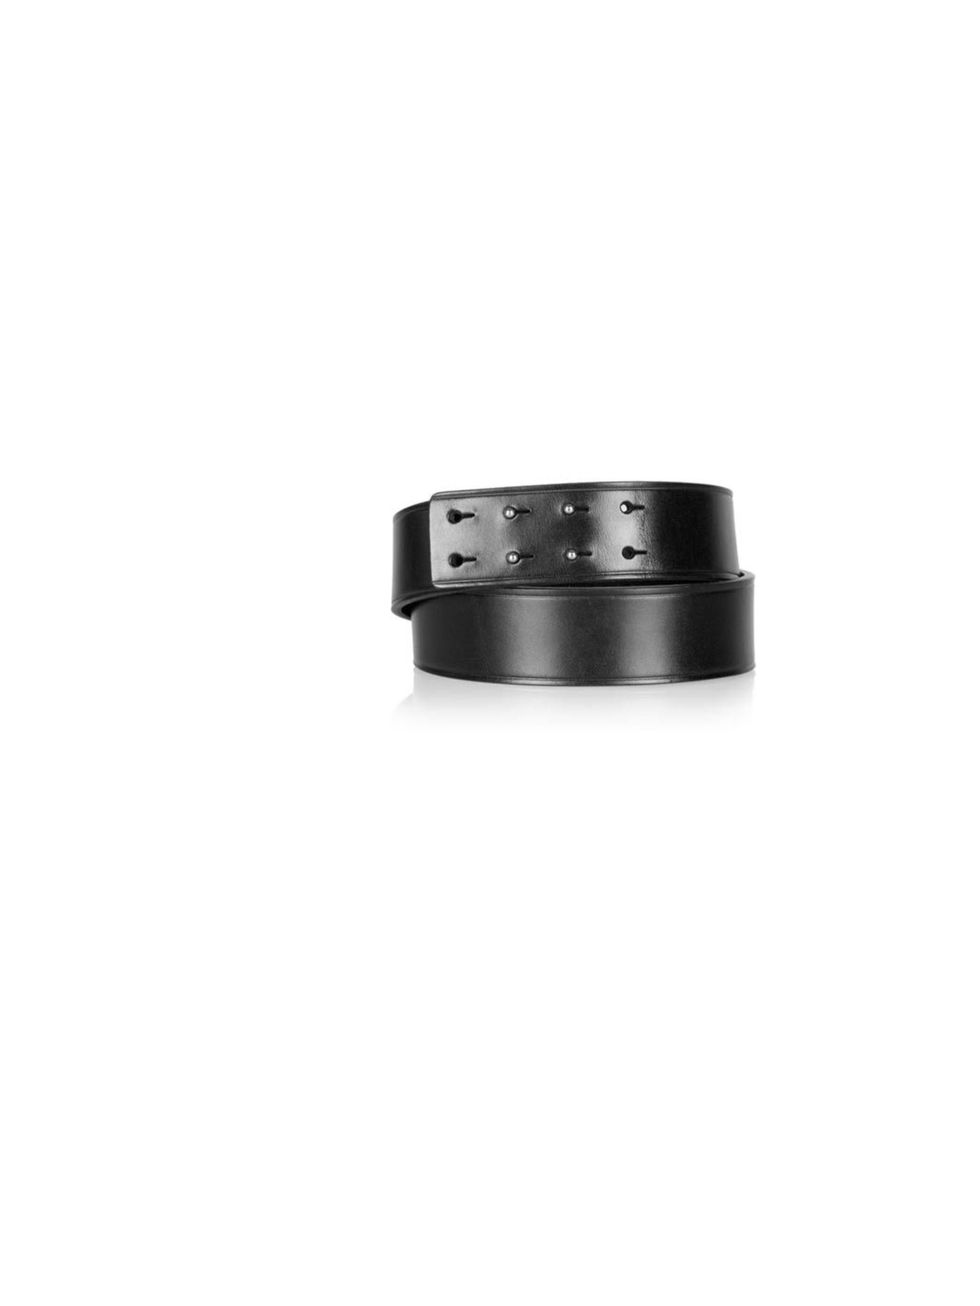 <p>Acne 'Lake' press stud-fastening leather belt, £90, at <a href="http://www.net-a-porter.com/product/191531">Net-a-Porter</a></p>